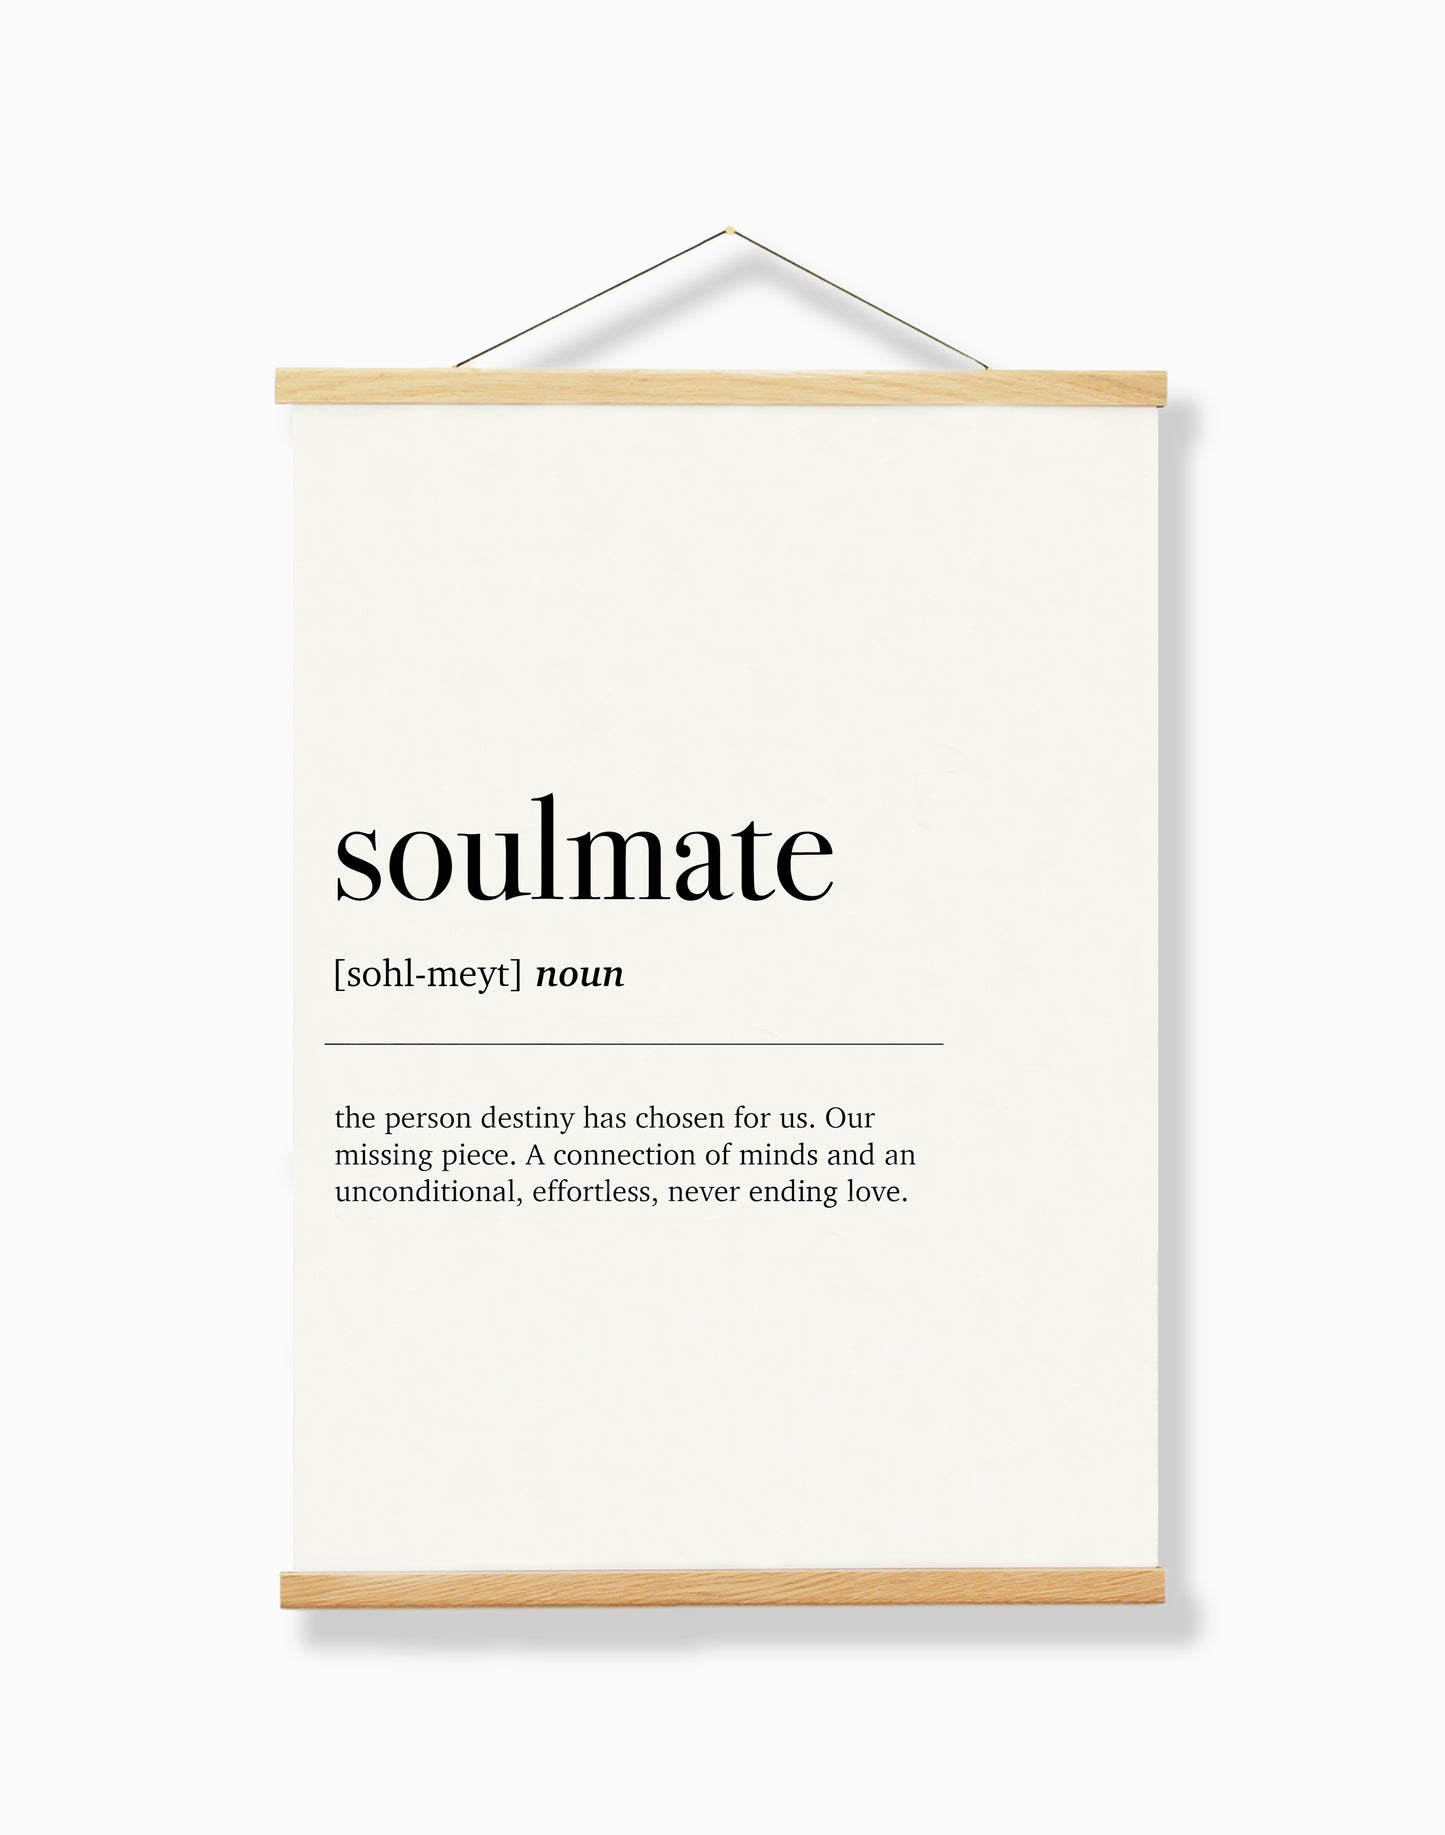 Soulmate and Marriage - Pair of A4 Prints